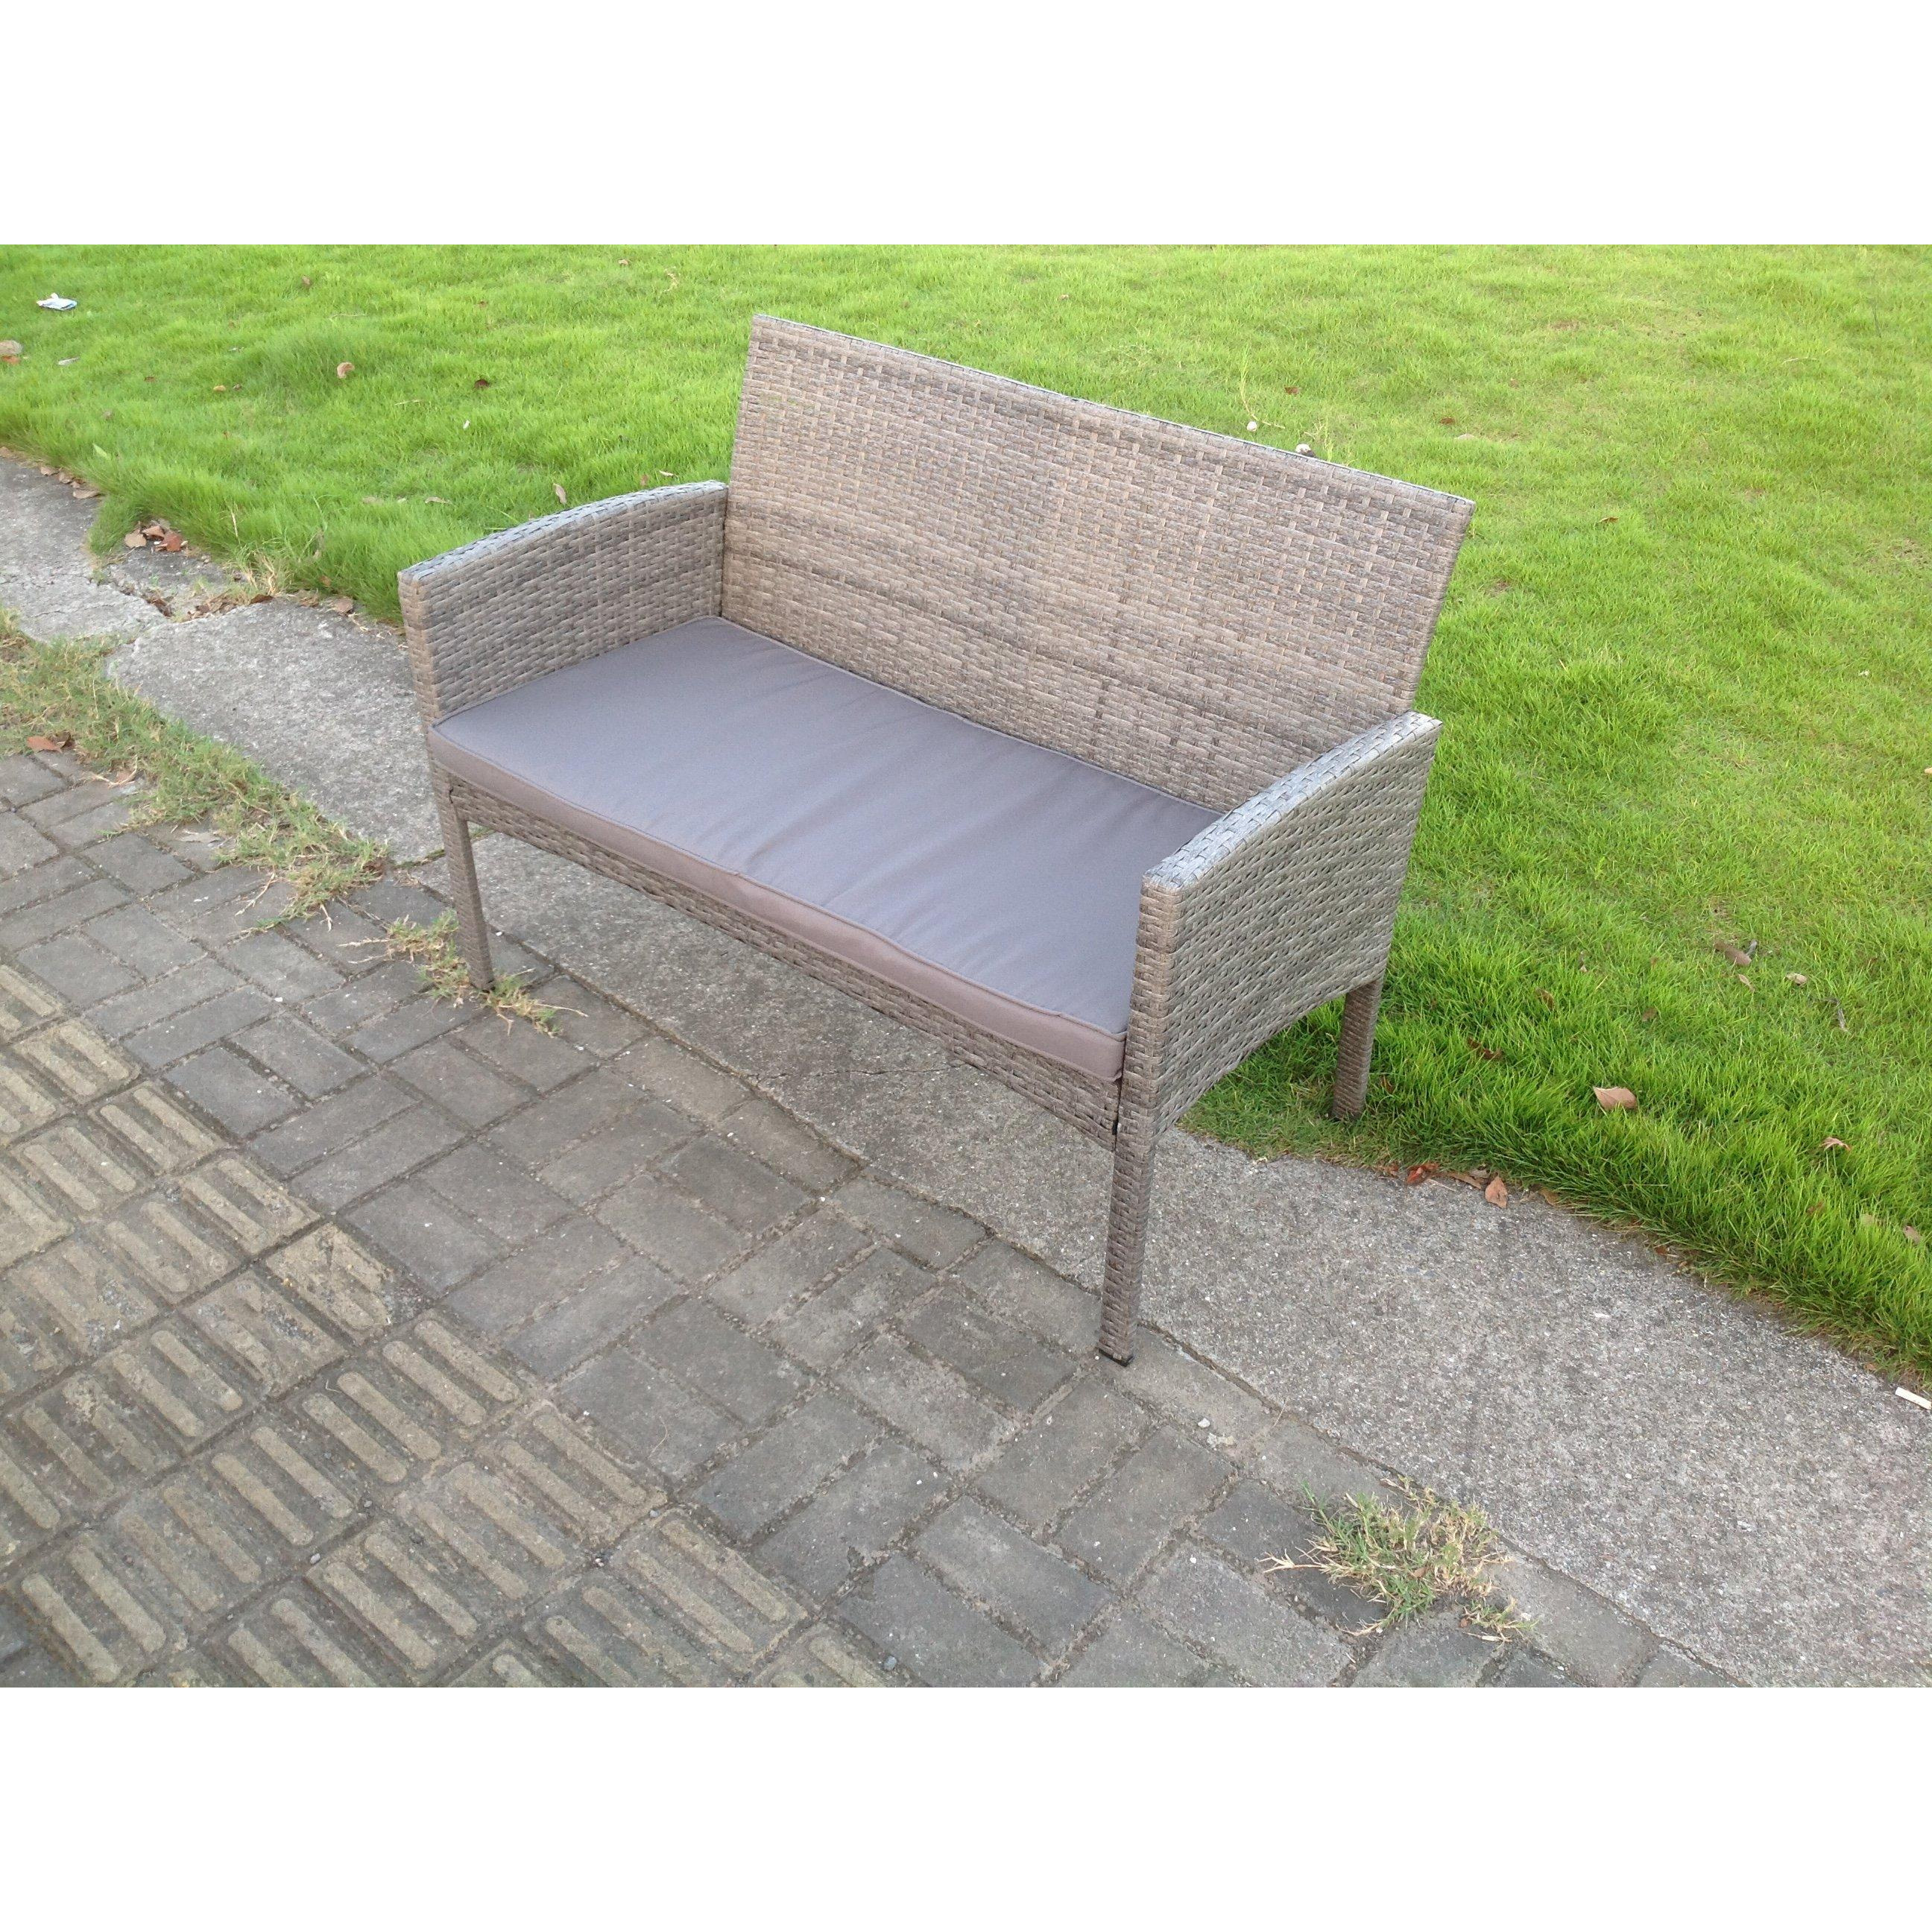 2 Seater Rattan Love Sofa Seat Double Chair Outdoor Garden Furniture With Cushion - image 1